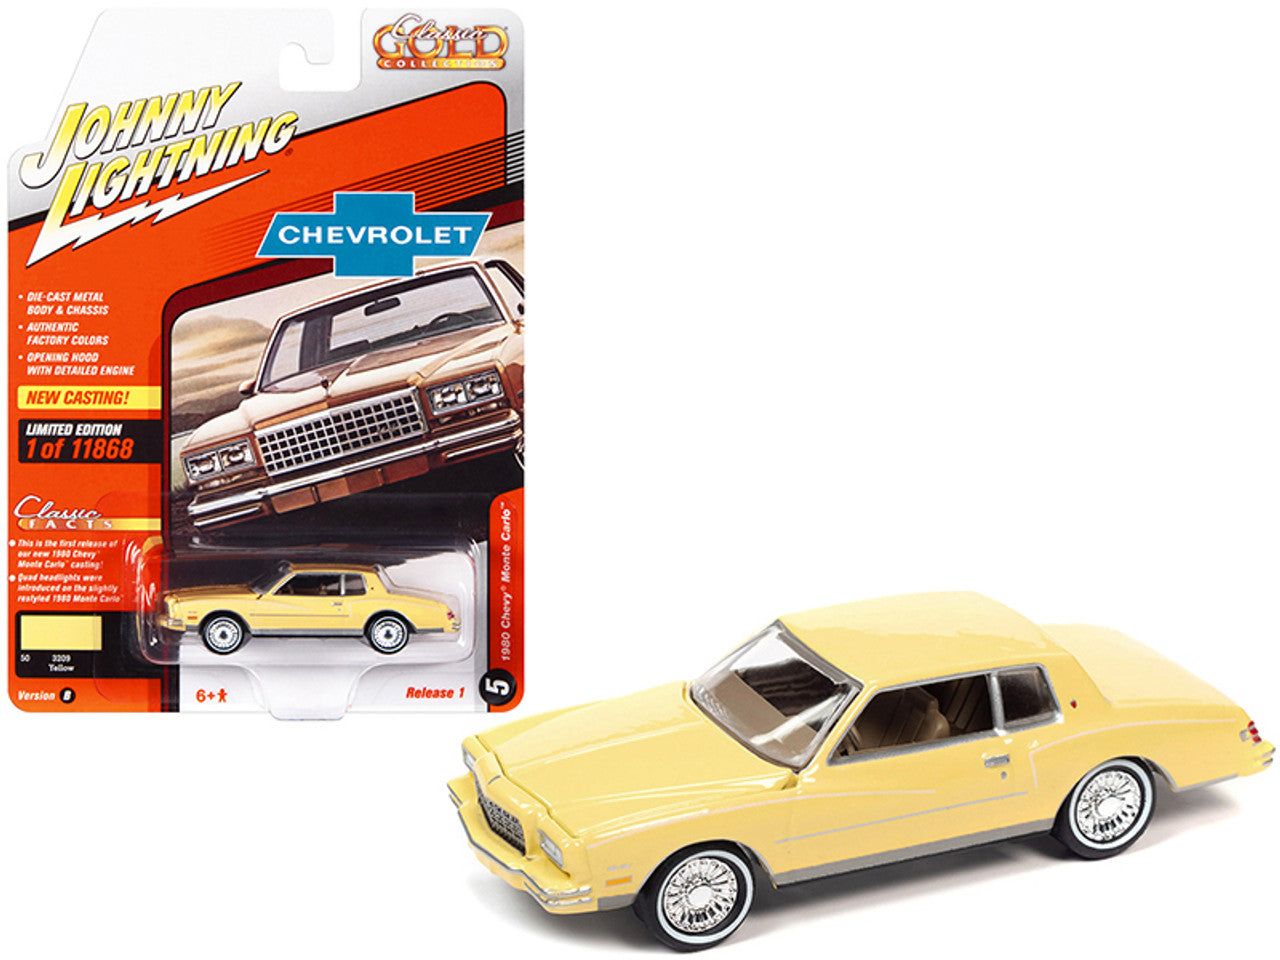 1/64 1980 CHEVY MONTE CARLO - CLASSIC GOLD COLLECTION